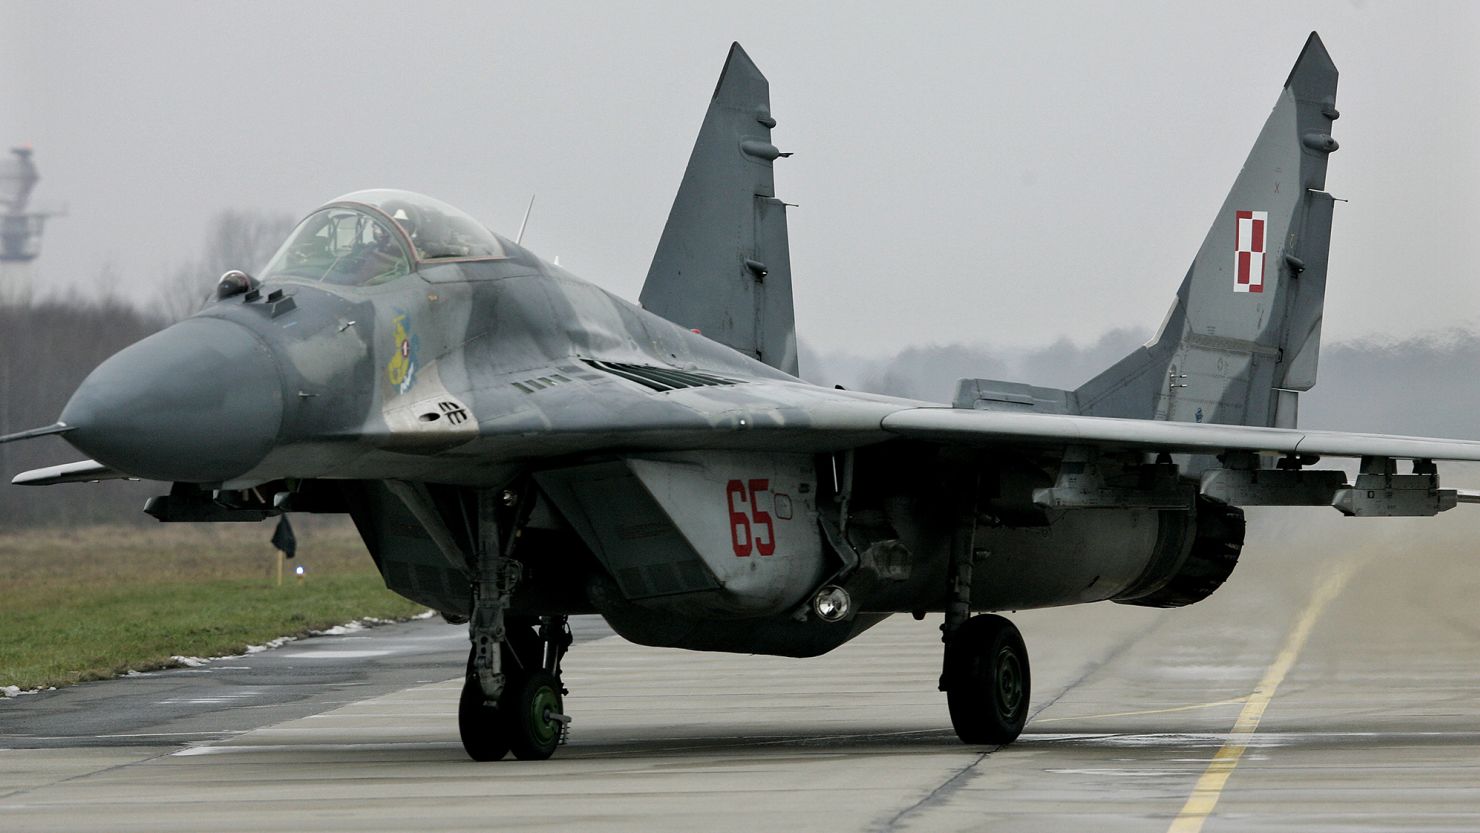 Polish MiG-29s are the first fighter jets to be pledged to Ukraine by a NATO member.